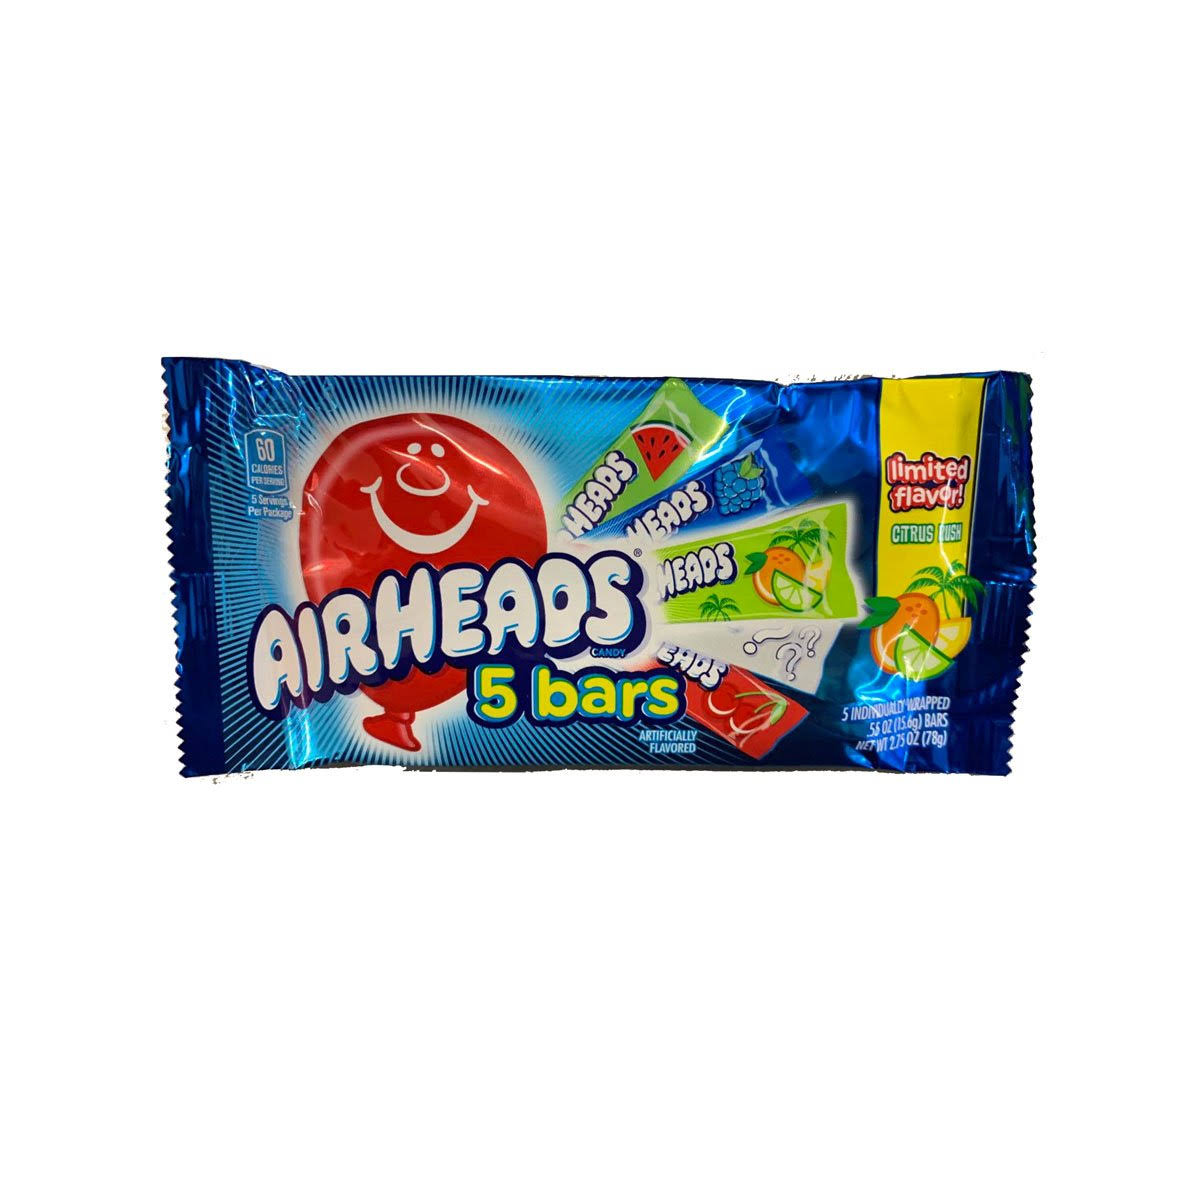 Airheads 5 Bar Limited Flavour